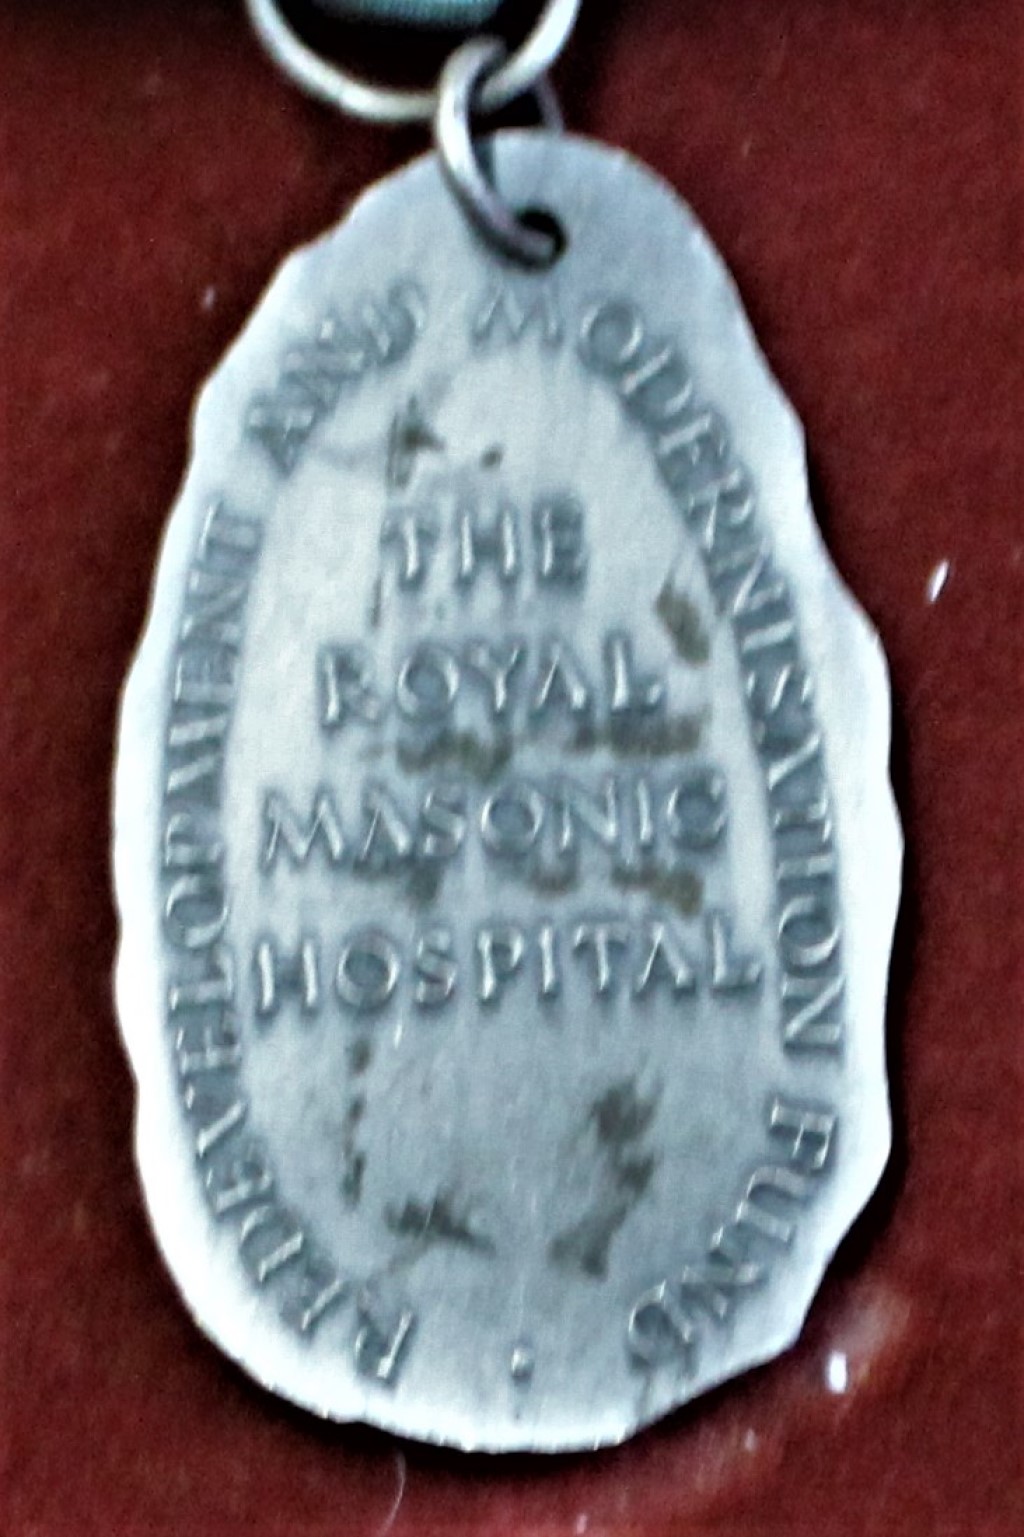 Masonic Jewel for the Royal Masonic Hospital "Redevelopment and Modernisation Fund" in white metal - Image 2 of 4